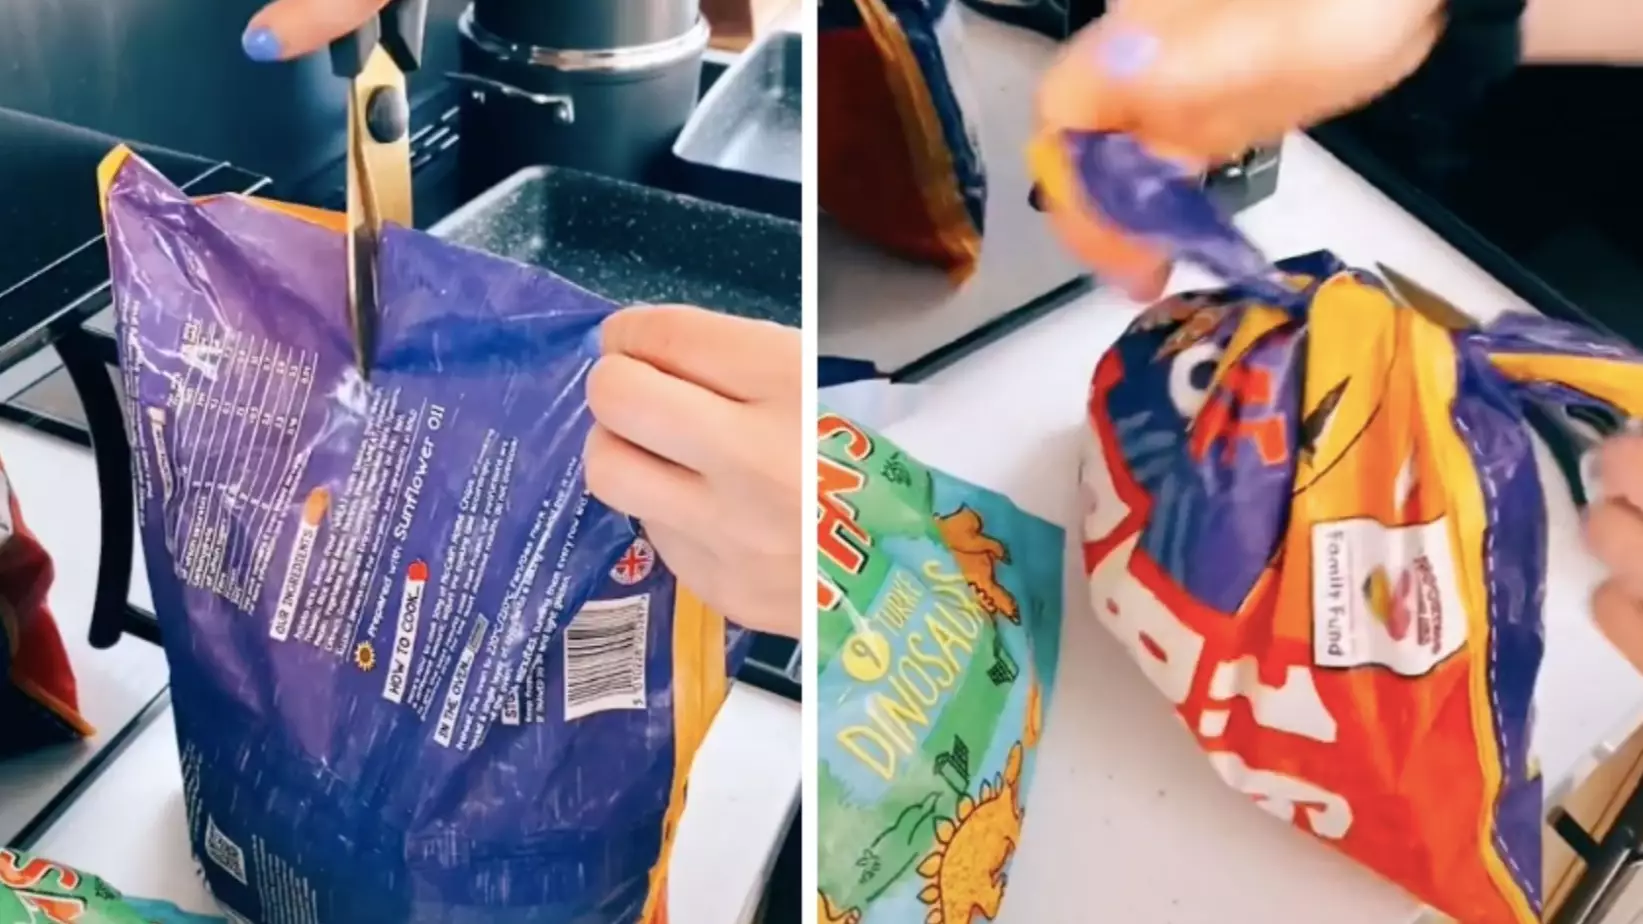 People Are Losing It Over This Woman's Clever Freezer Food Hack